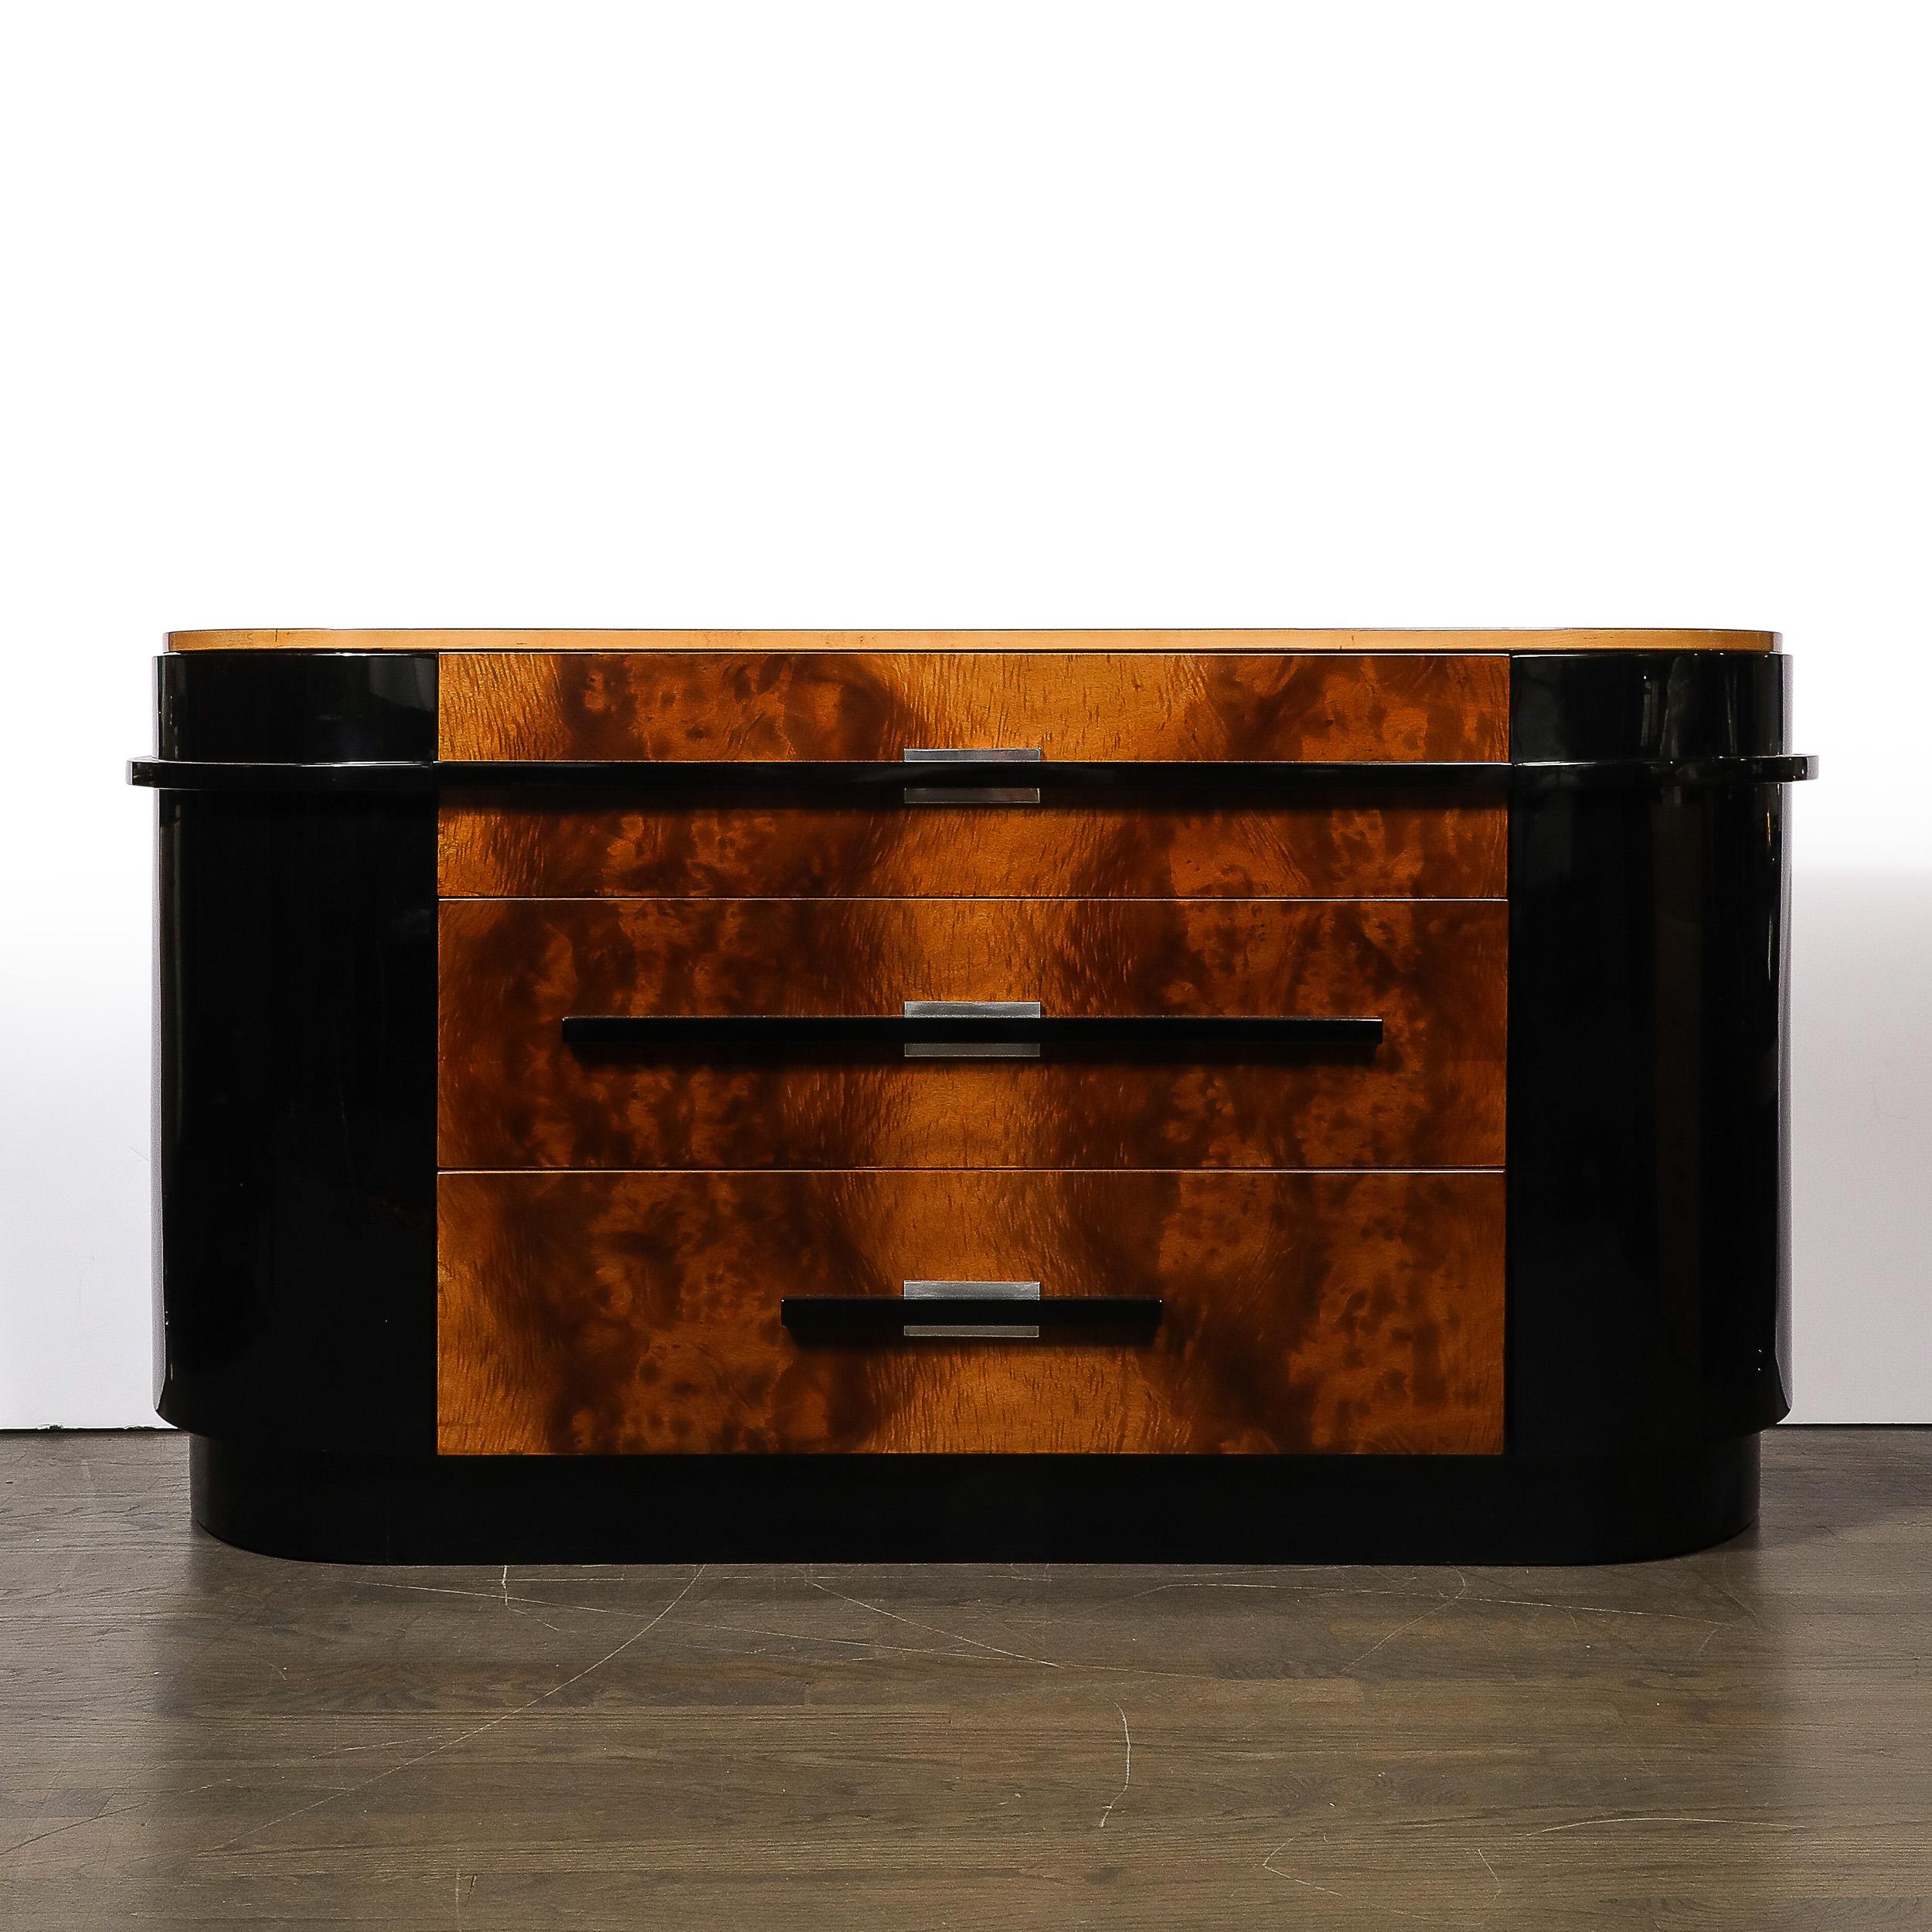 American Art Deco Burled Walnut Sideboard by Donald Deskey for the Hastings Company For Sale